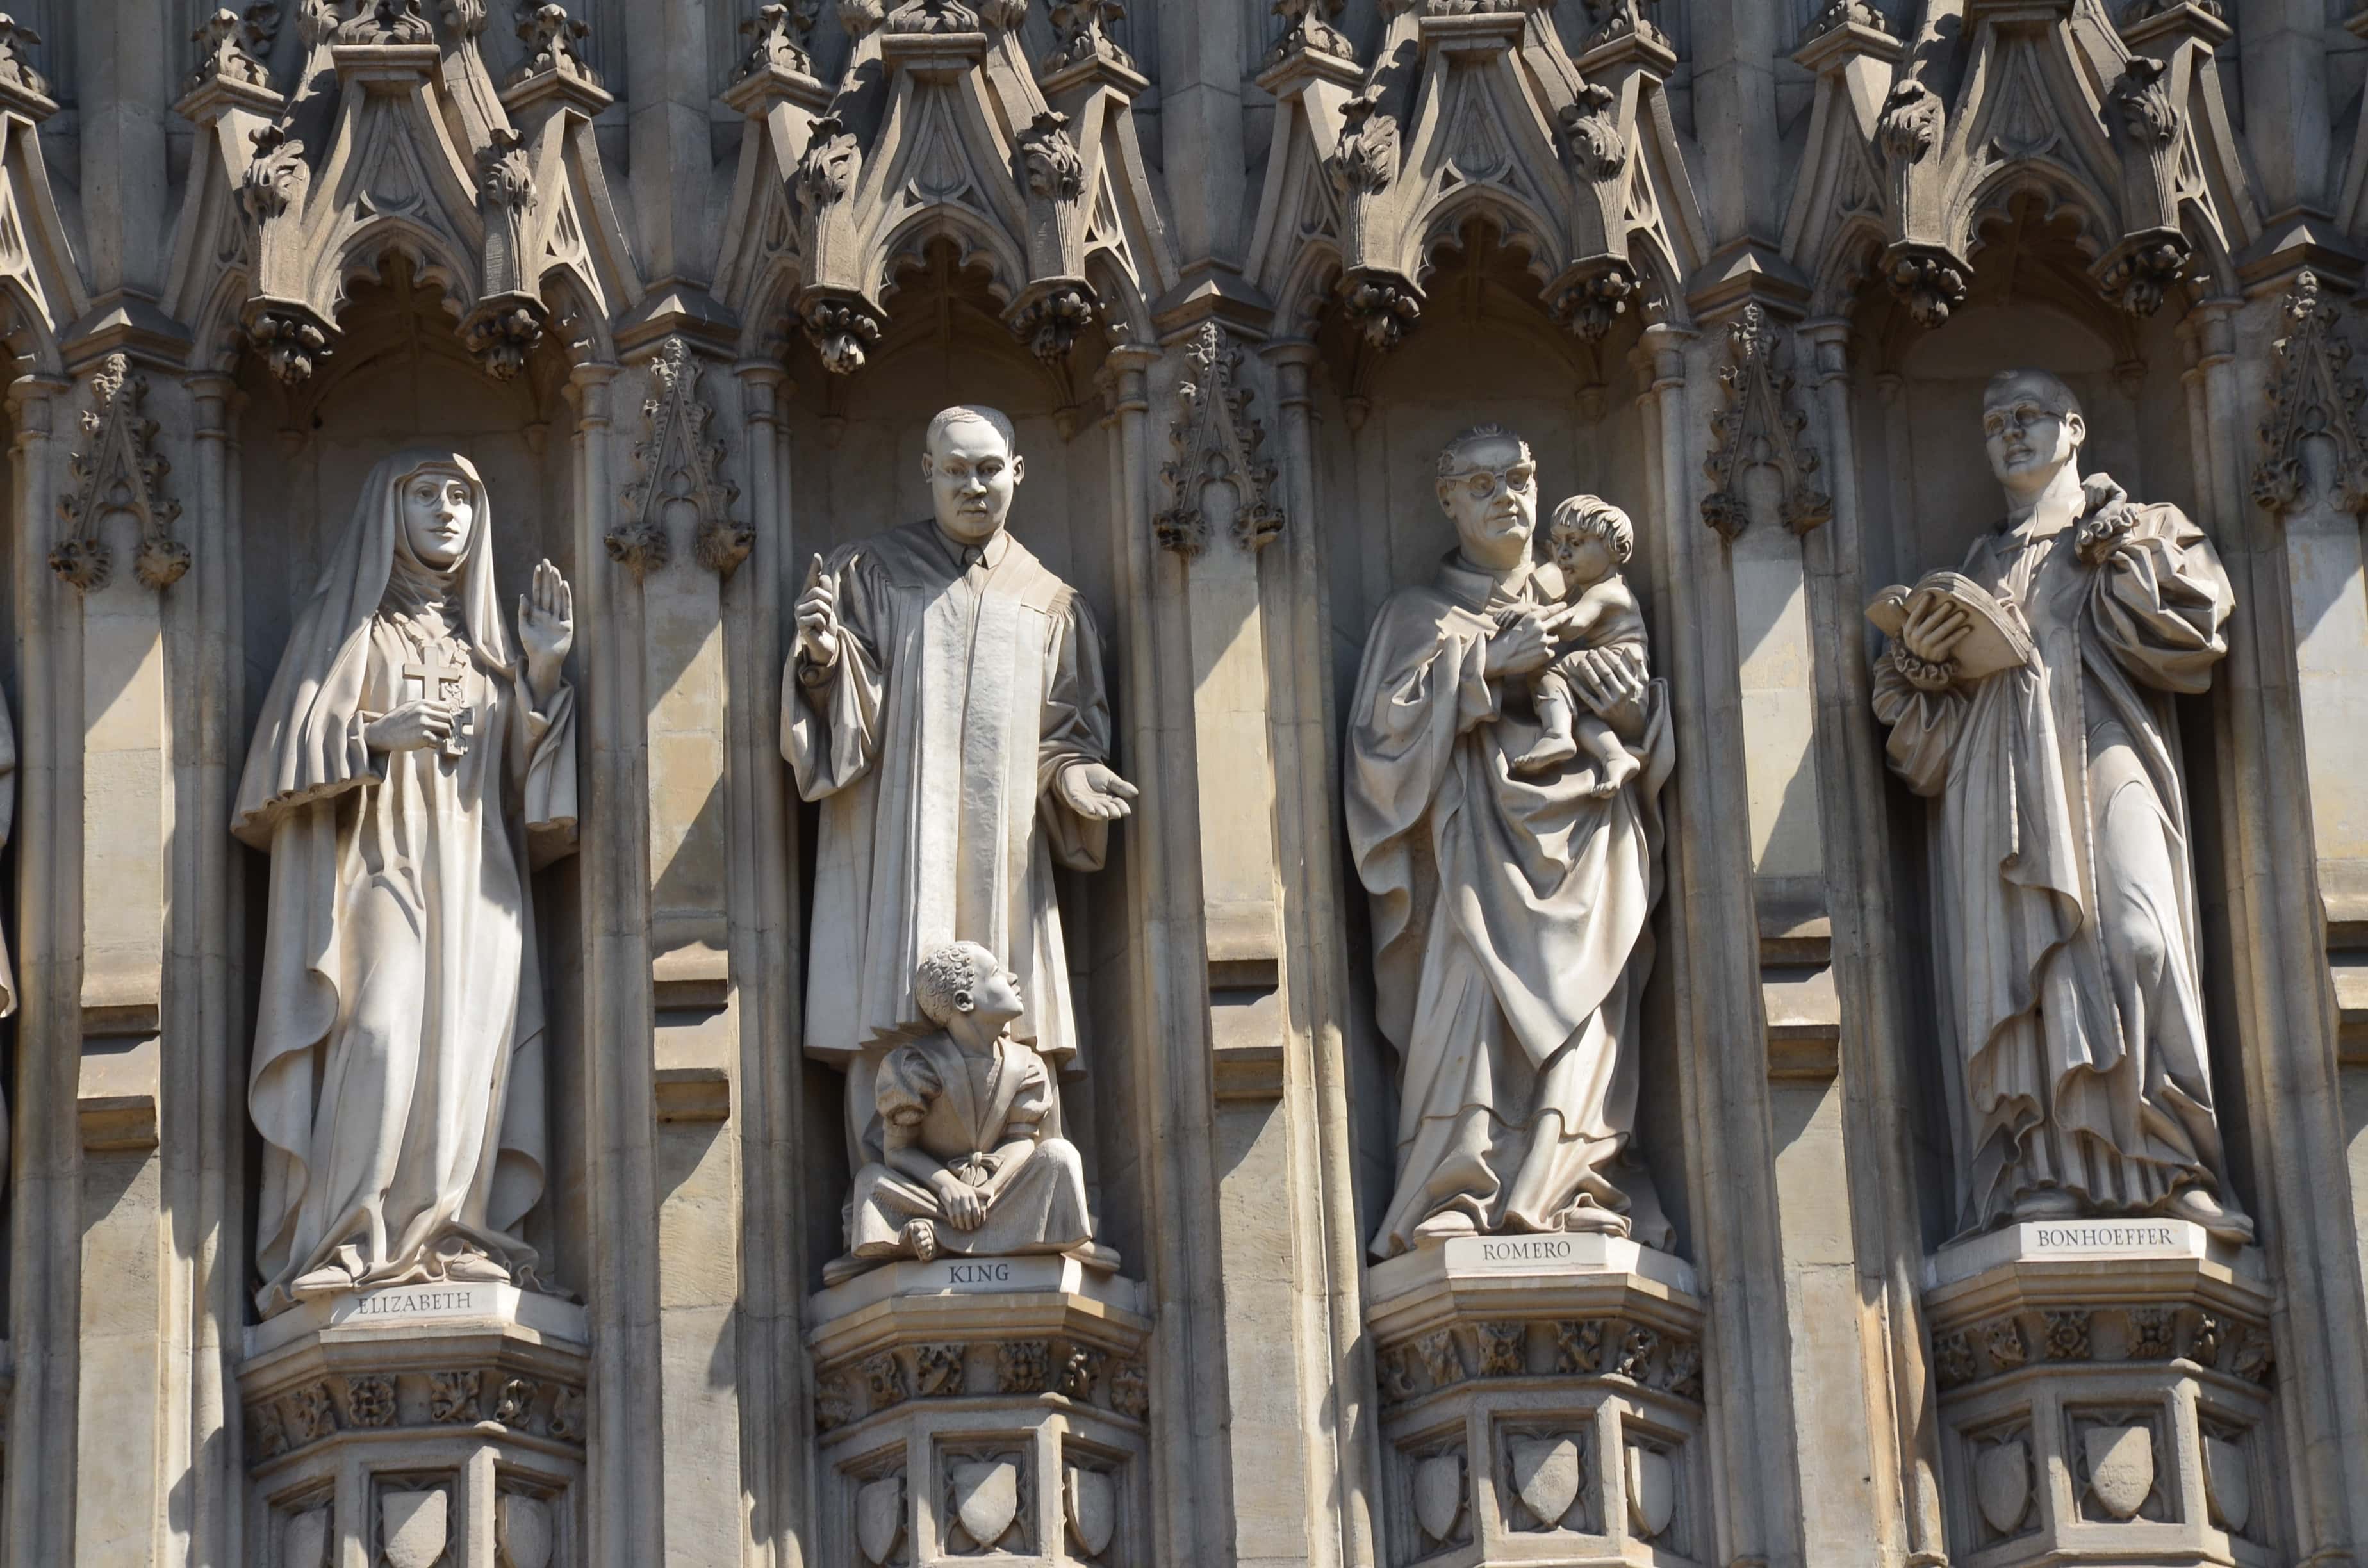 Statues of Christian martyrs at Westminster Abbey in London, England